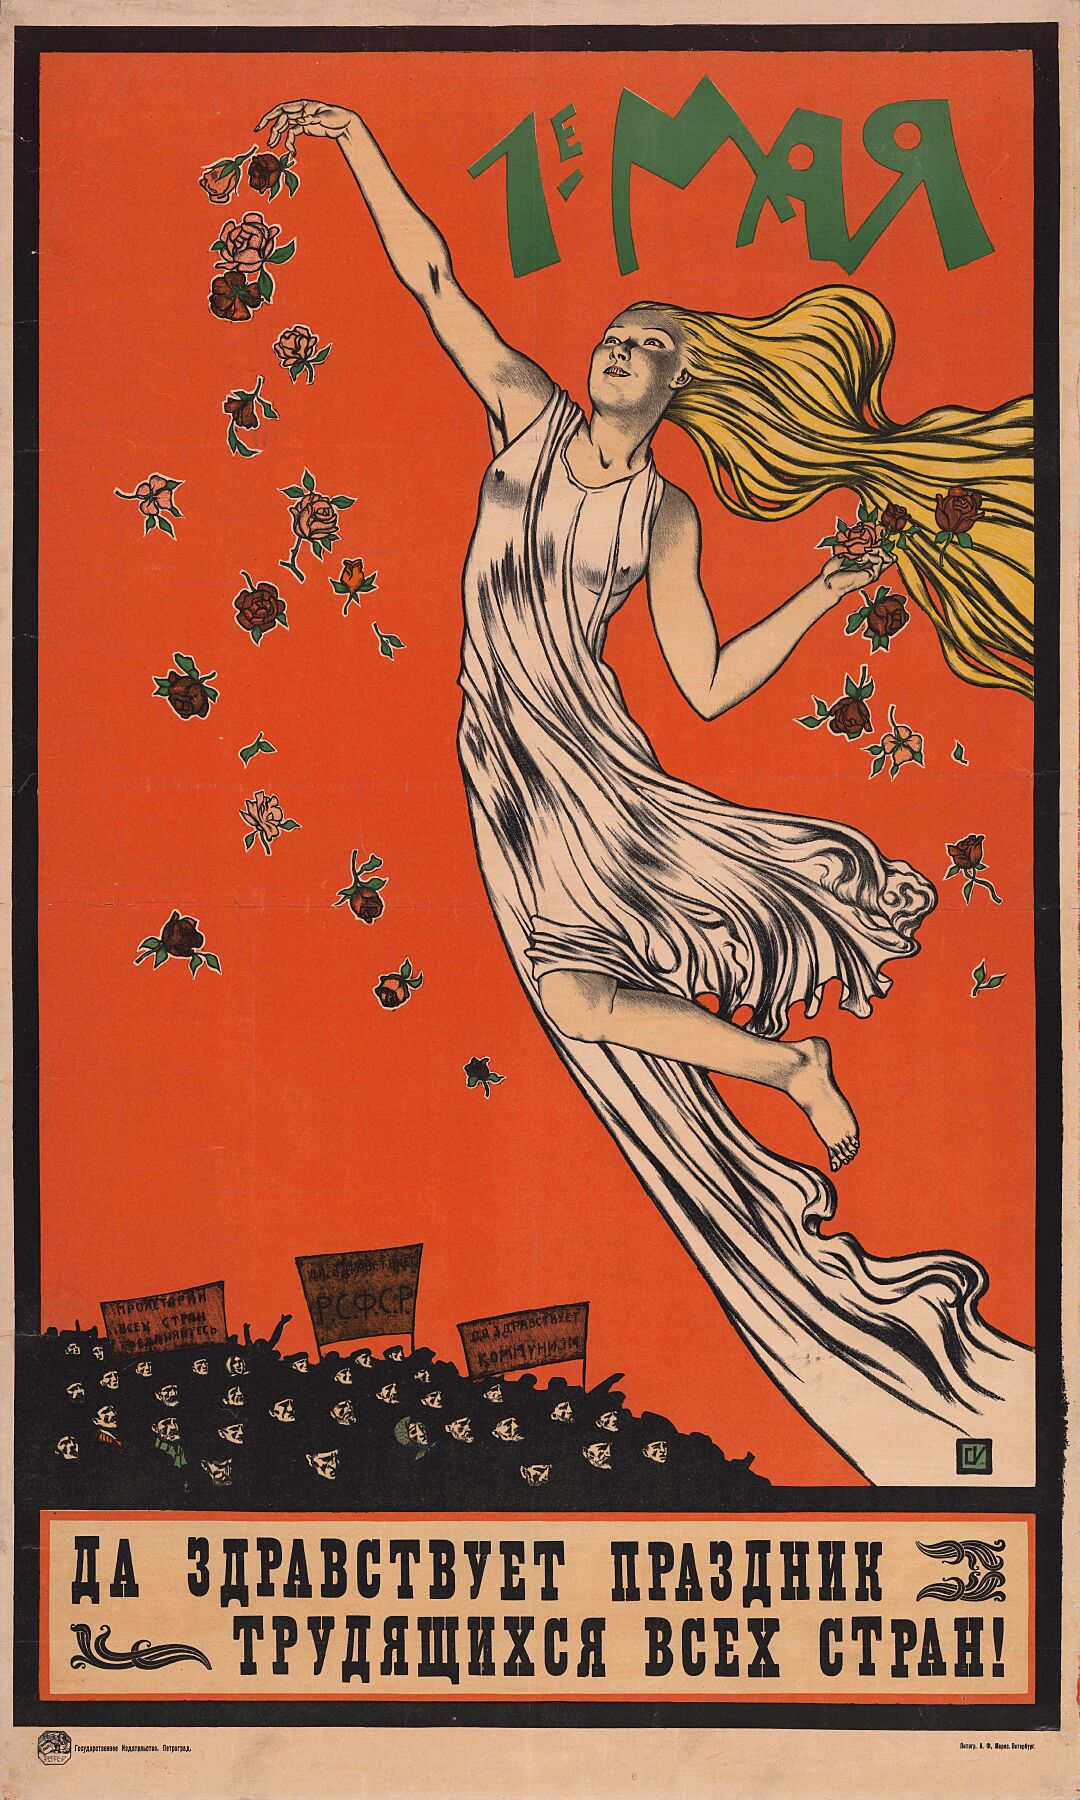 May! Long Live the Holiday of Workers of all Countries! - Petrograd, State Publishing House - 1920